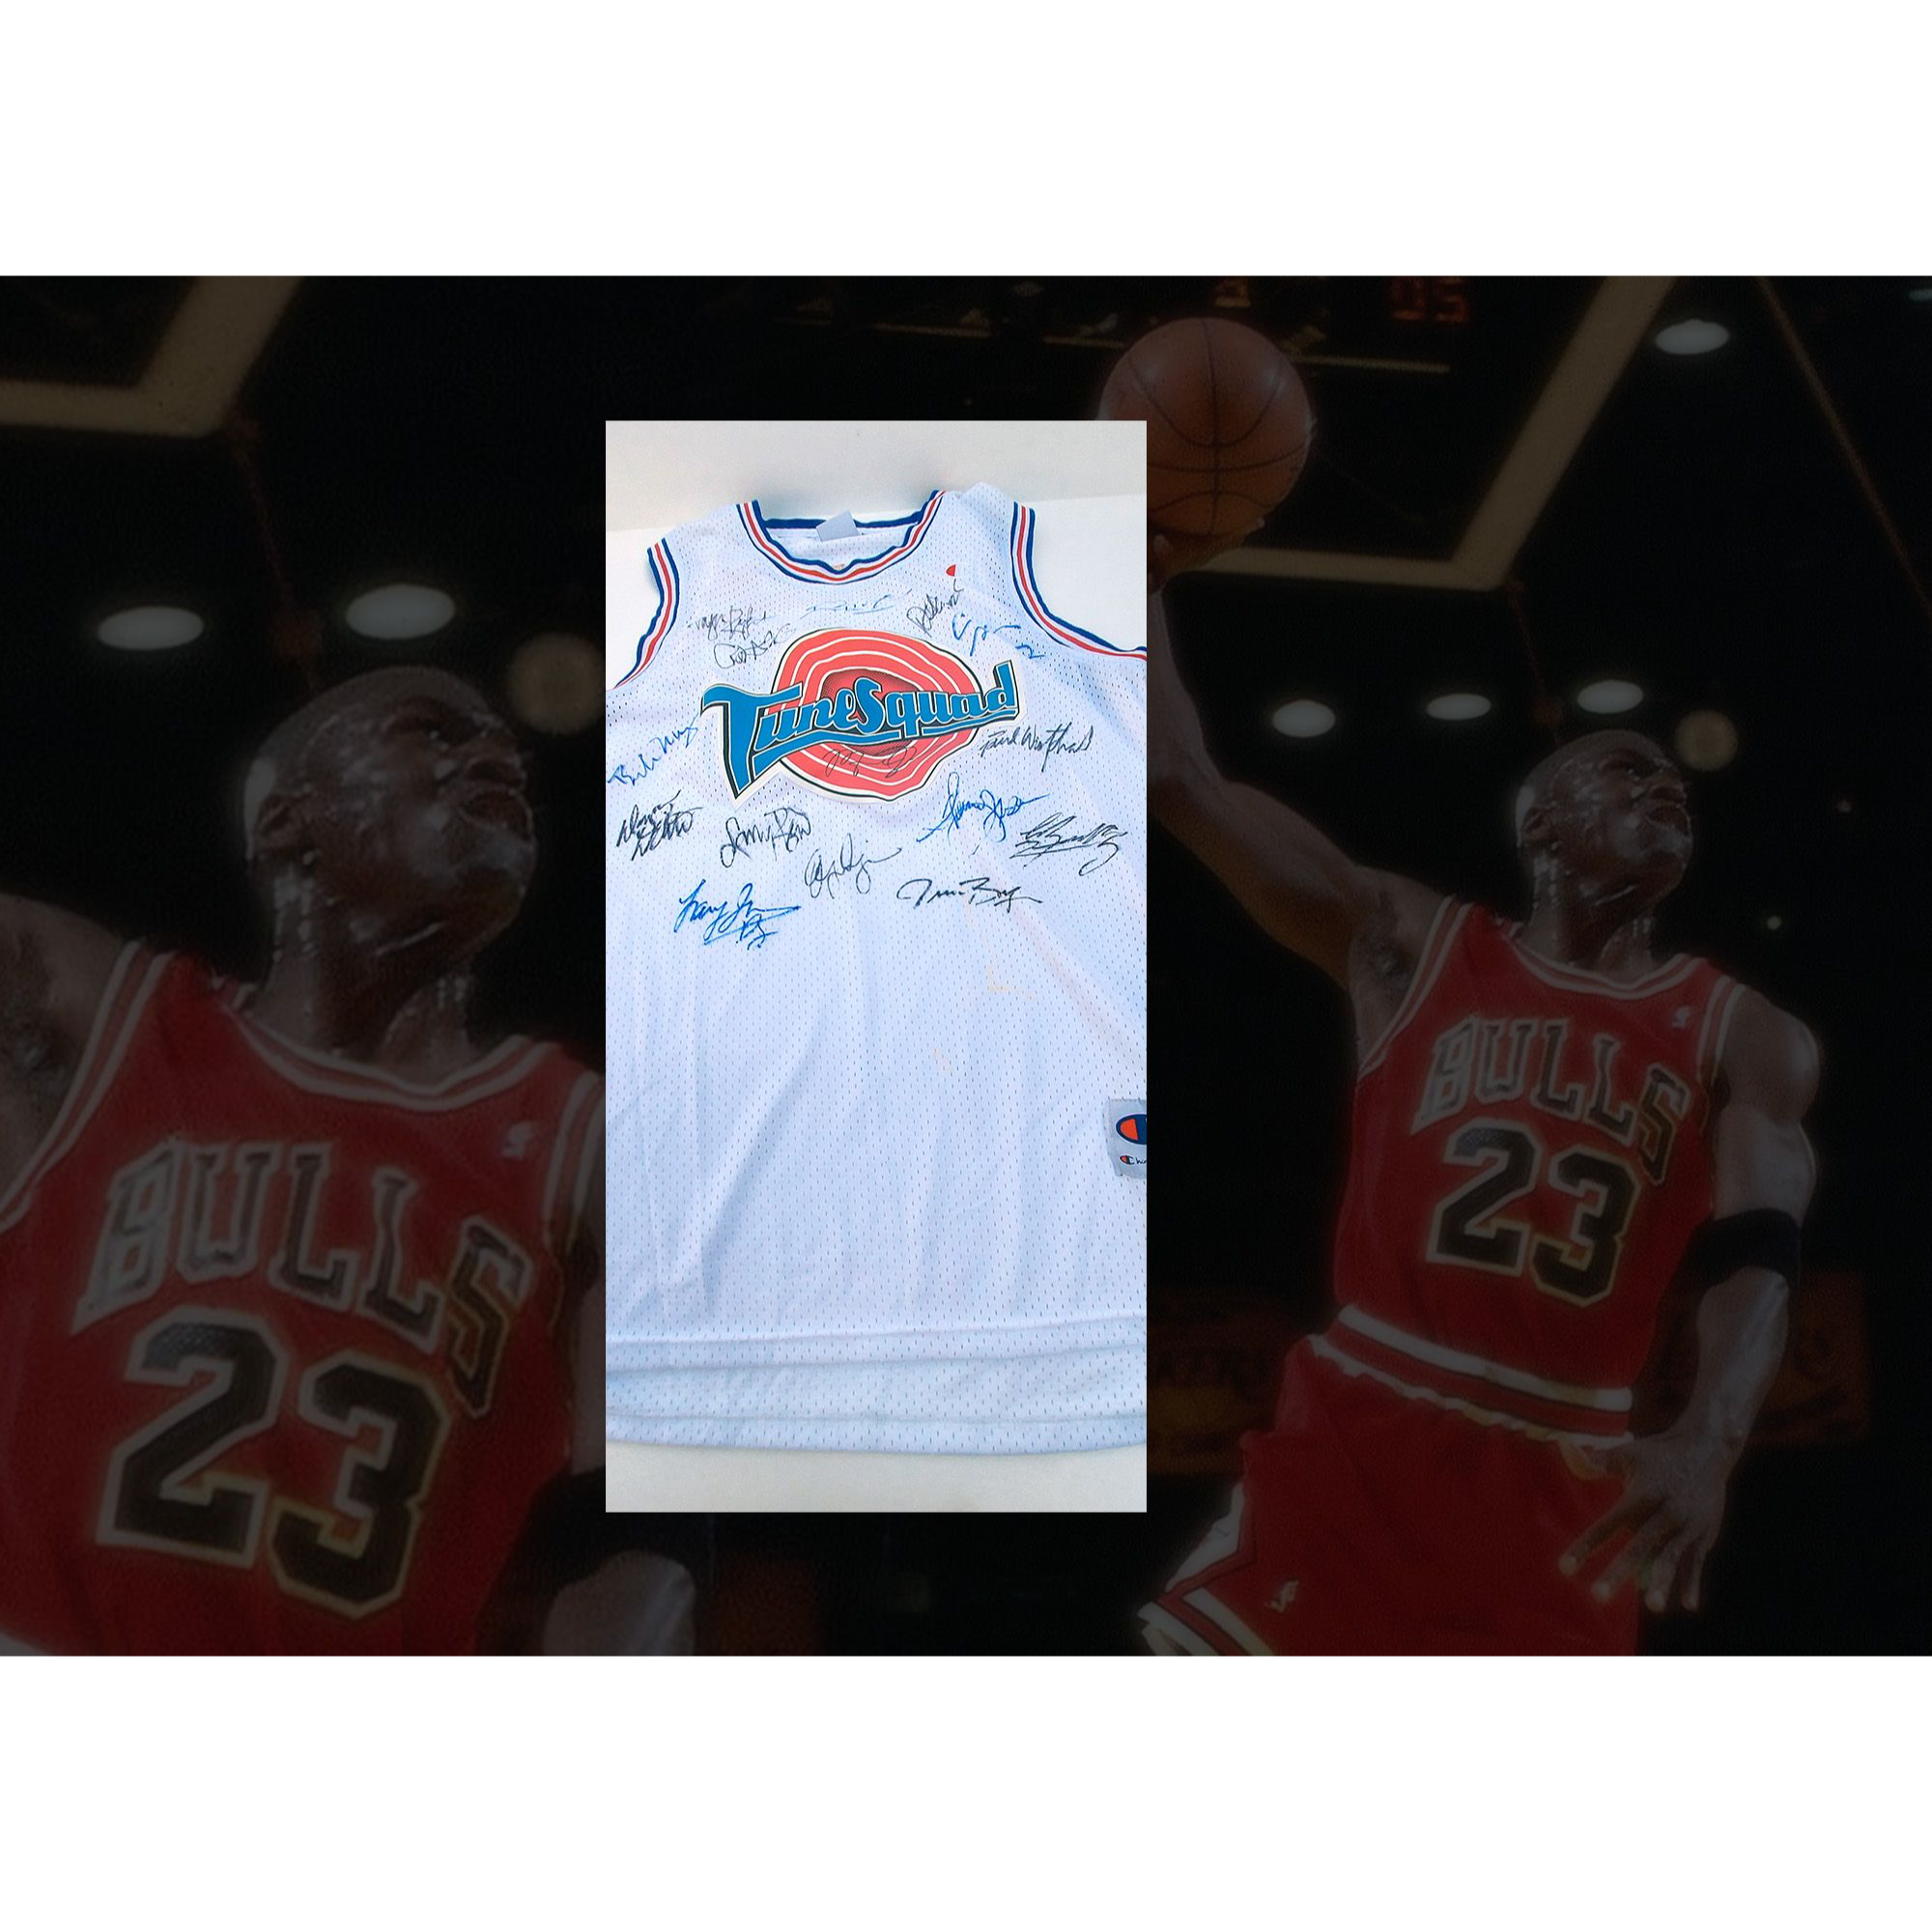 Michael Jordan Space Jam authentic jersey signed with proof